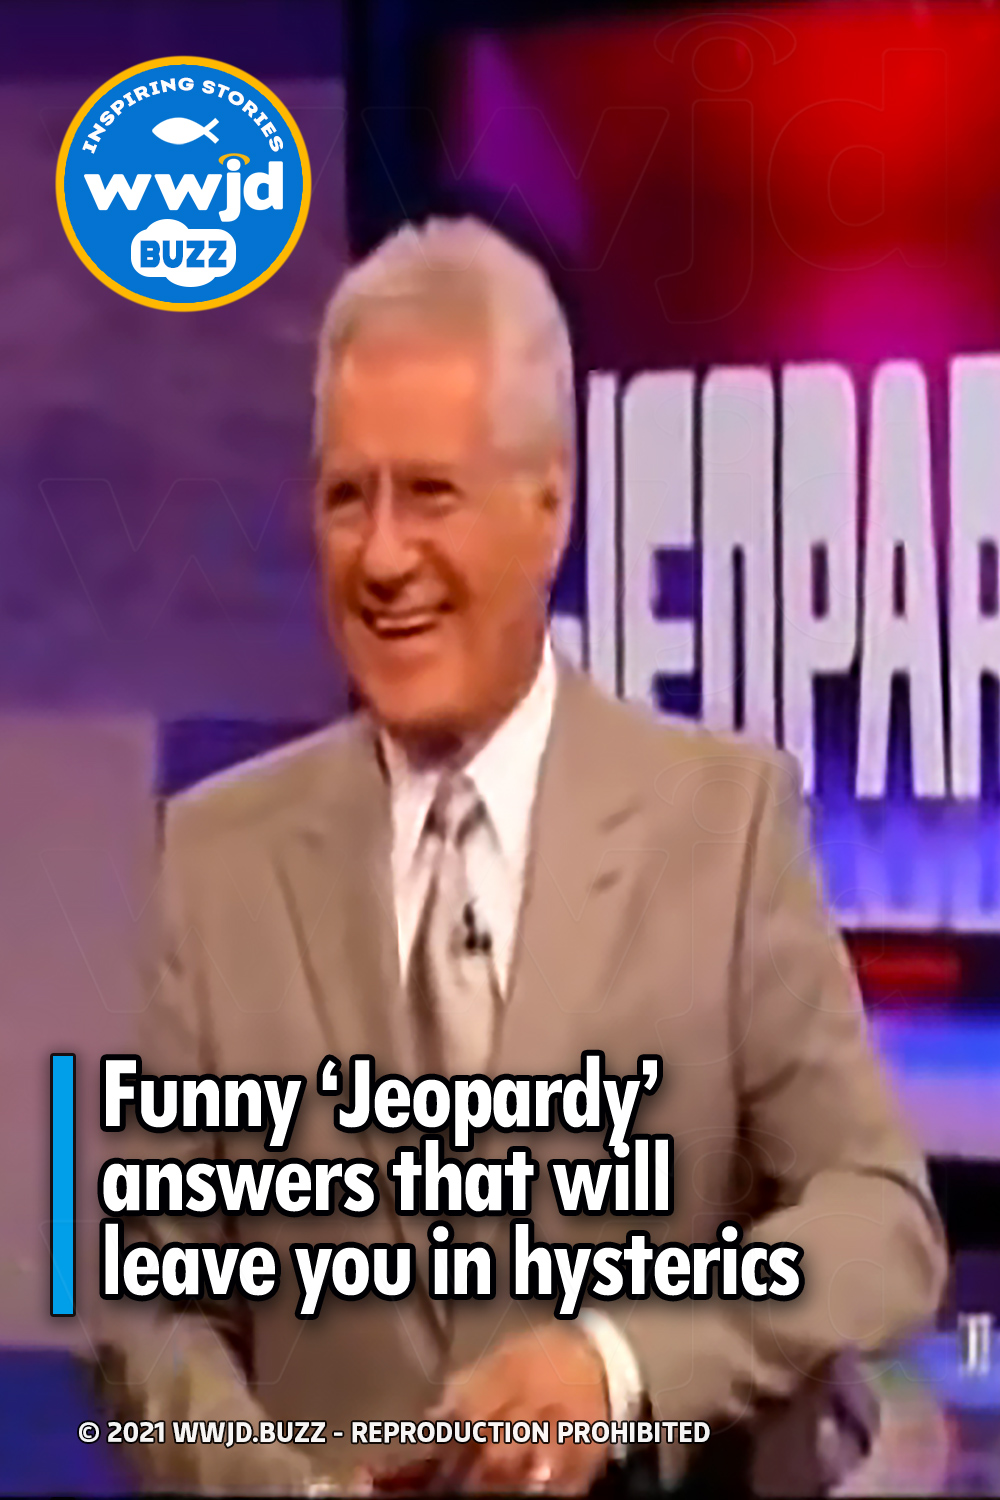 Funny ‘Jeopardy’ answers that will leave you in hysterics